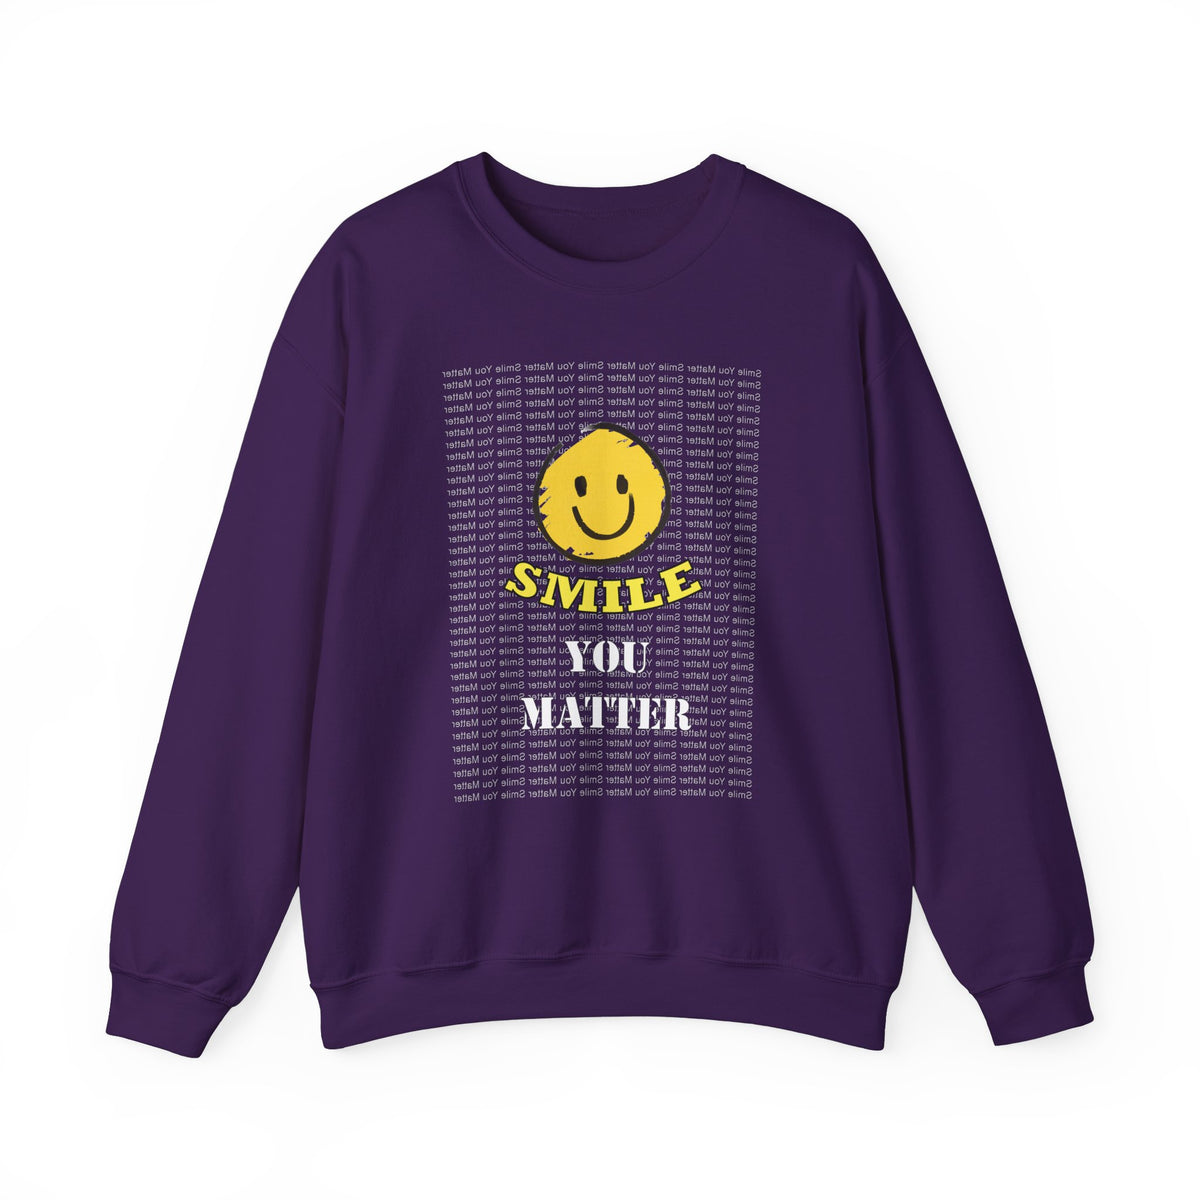 Smile. You Matter - Mental Health, Positive Reflections Sweatshirt, Inspirational - Shipping Included - WaterDragon Apparel